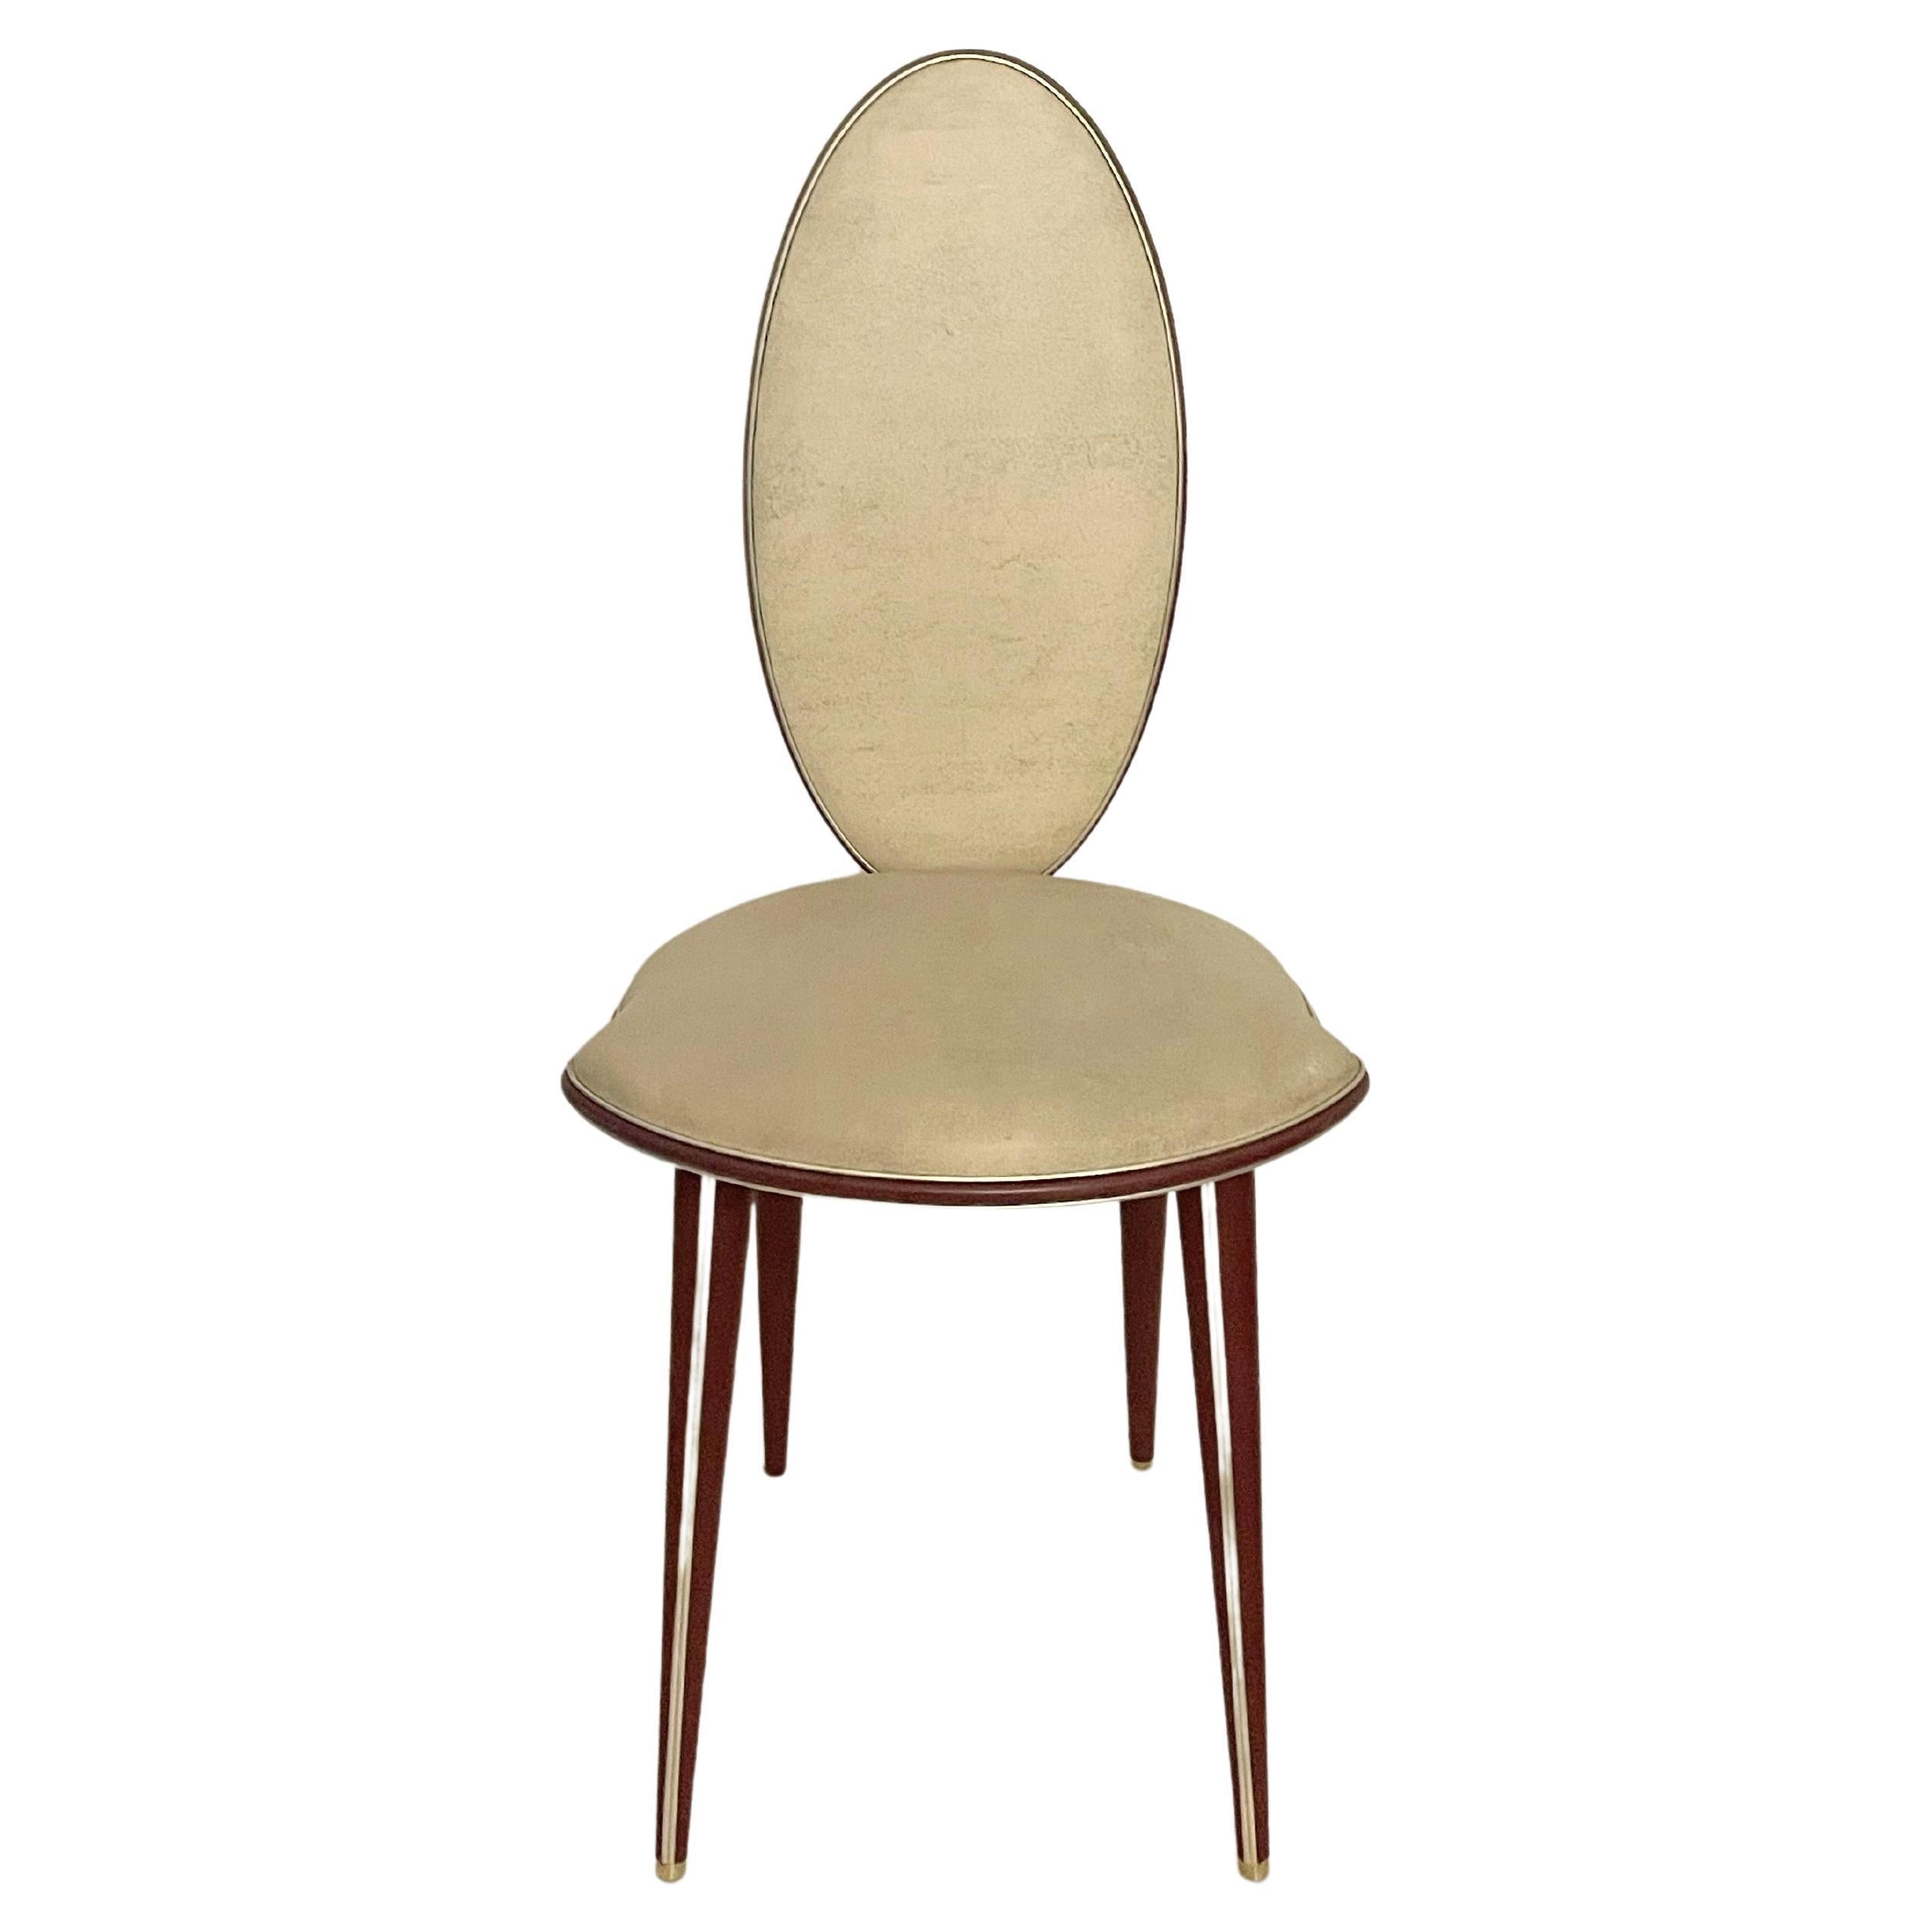 Vintage Italian Chair by Umberto Mascagni for Harrods 1950s